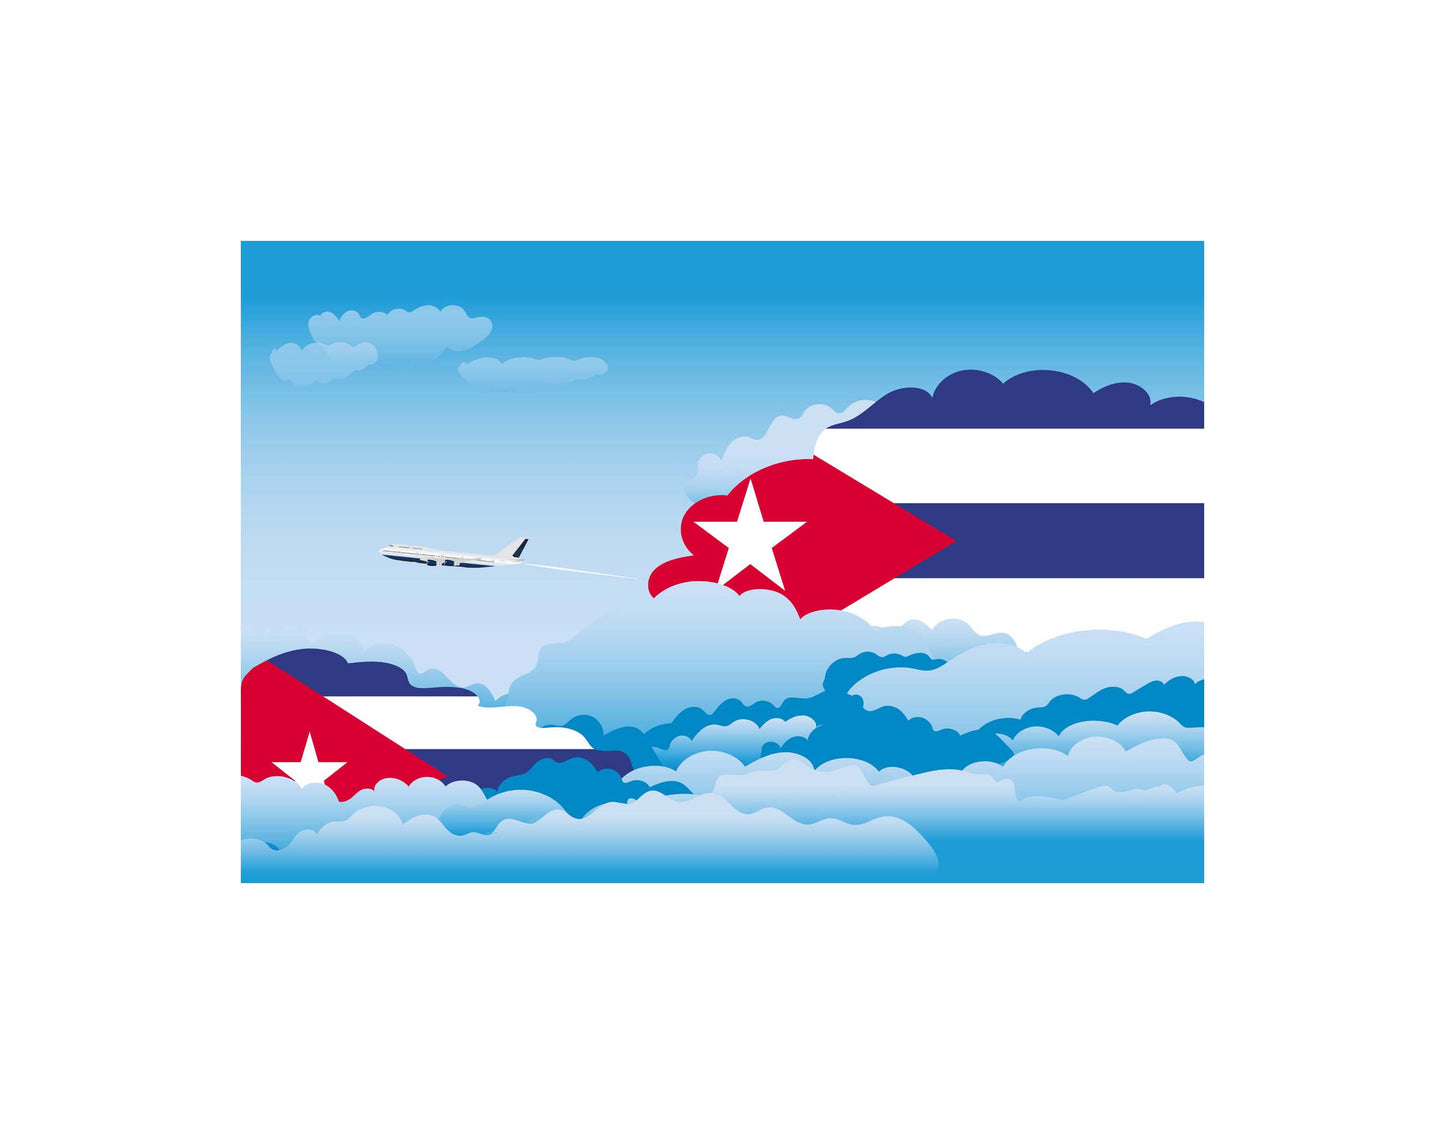 Cuba Flag Day Clouds Aeroplane Airport Flying Vector Illustration